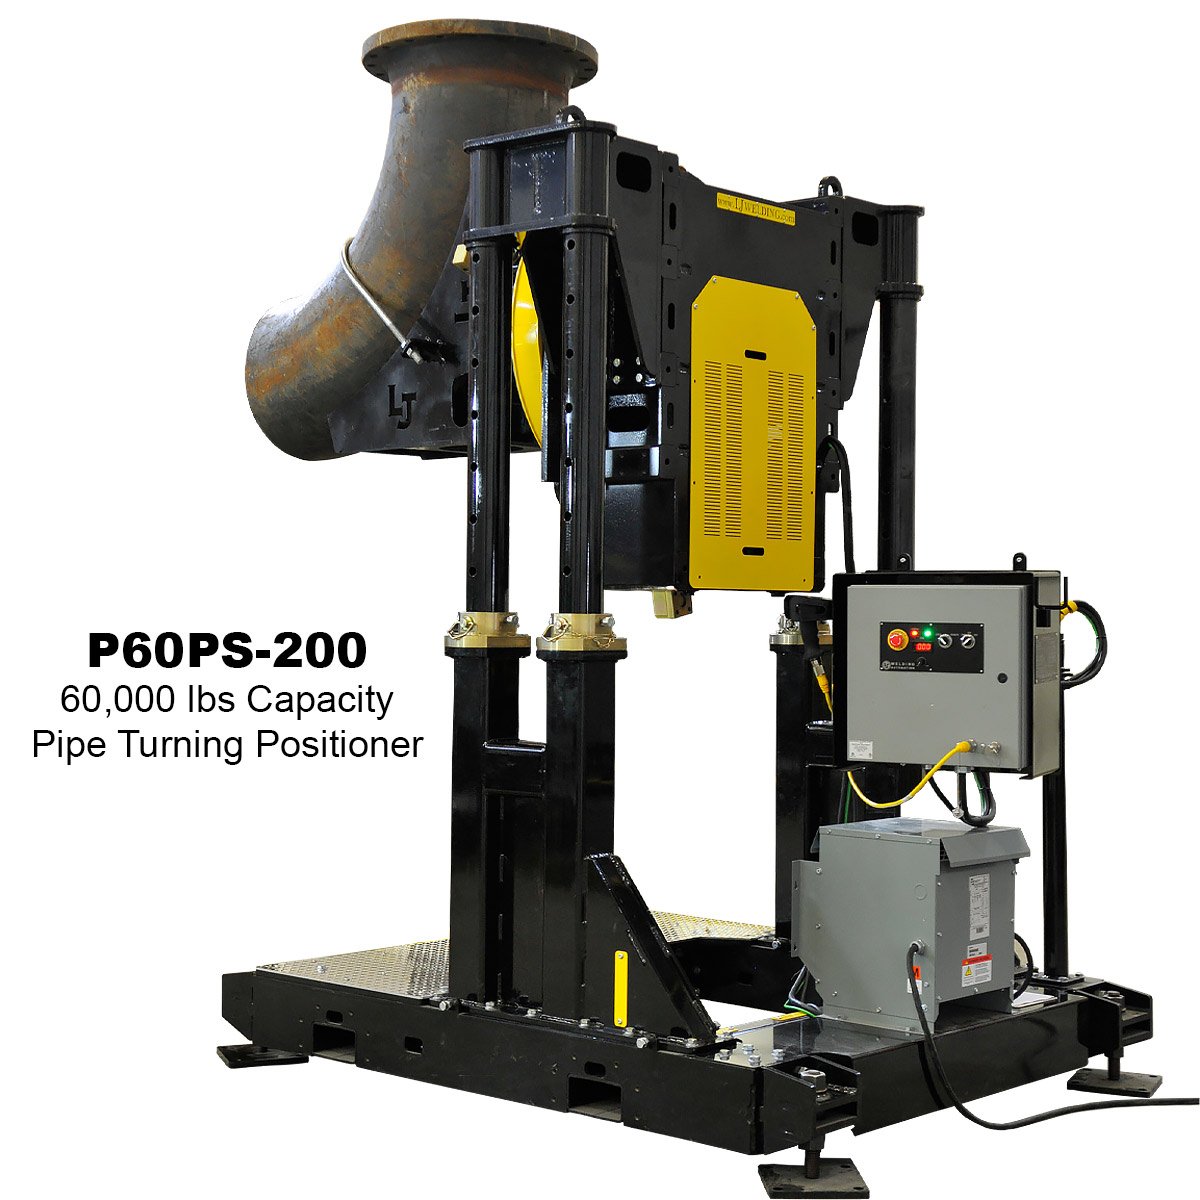 04-60000lb-Pipe-Turning-Positioner